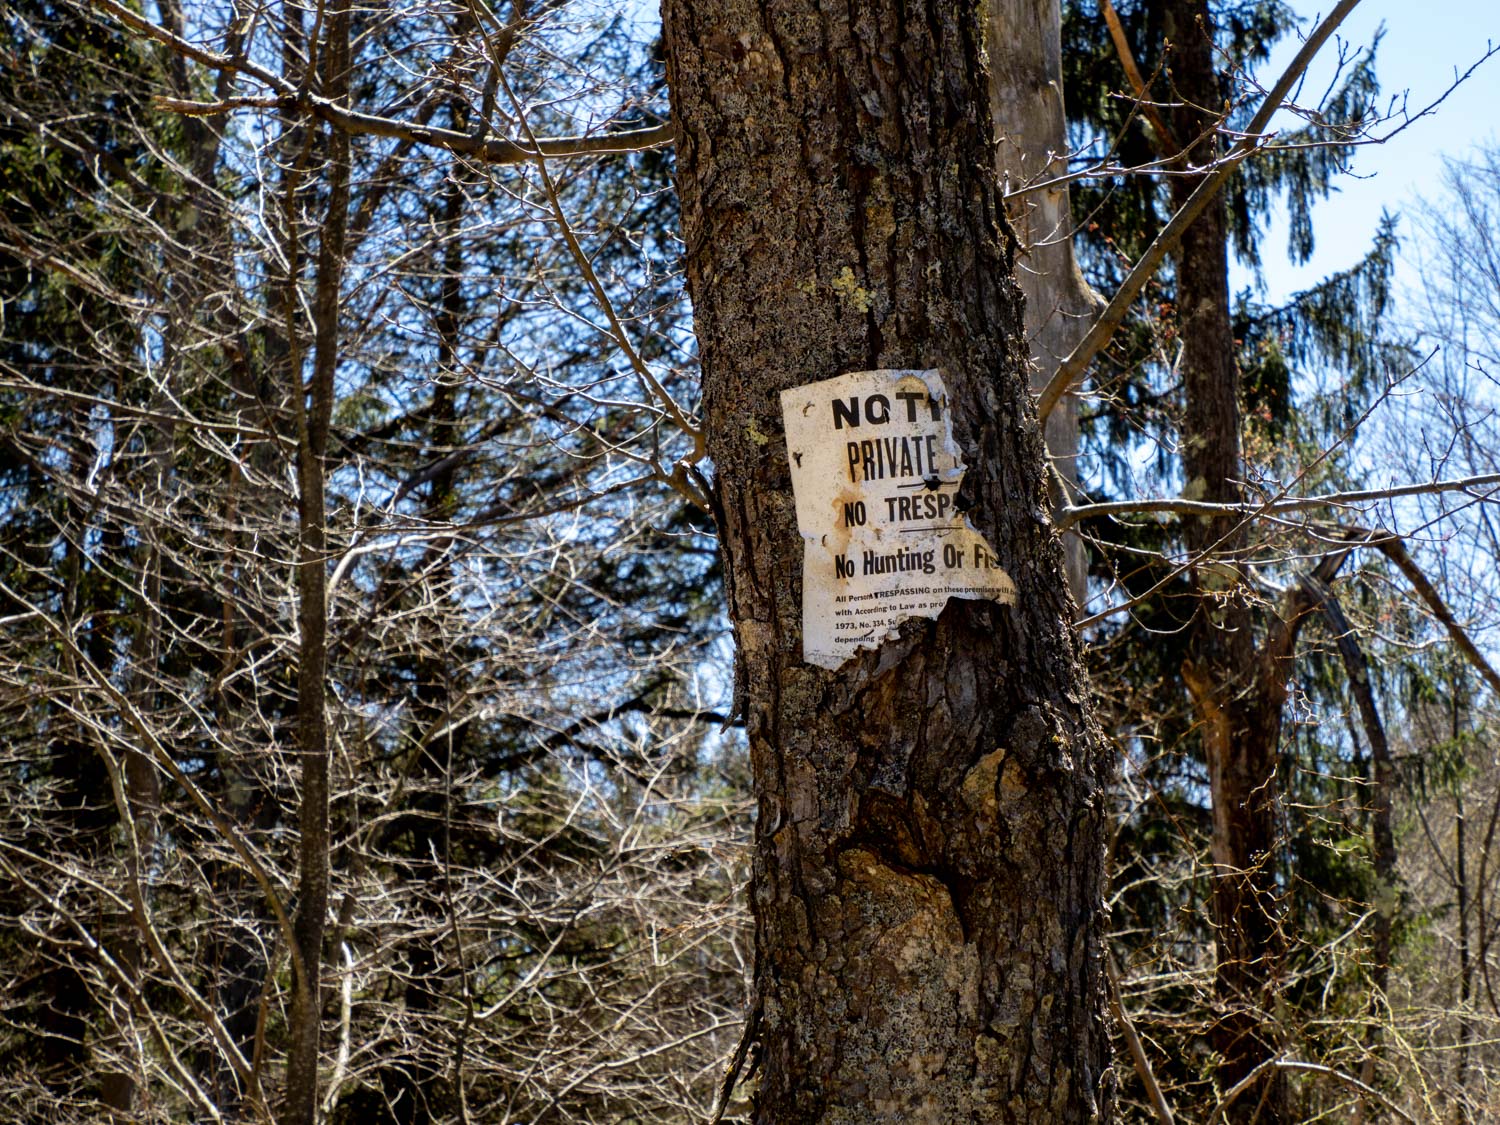 One of many NO TRESPASSING signs marking the boundaries of the Pinchot State Forest.